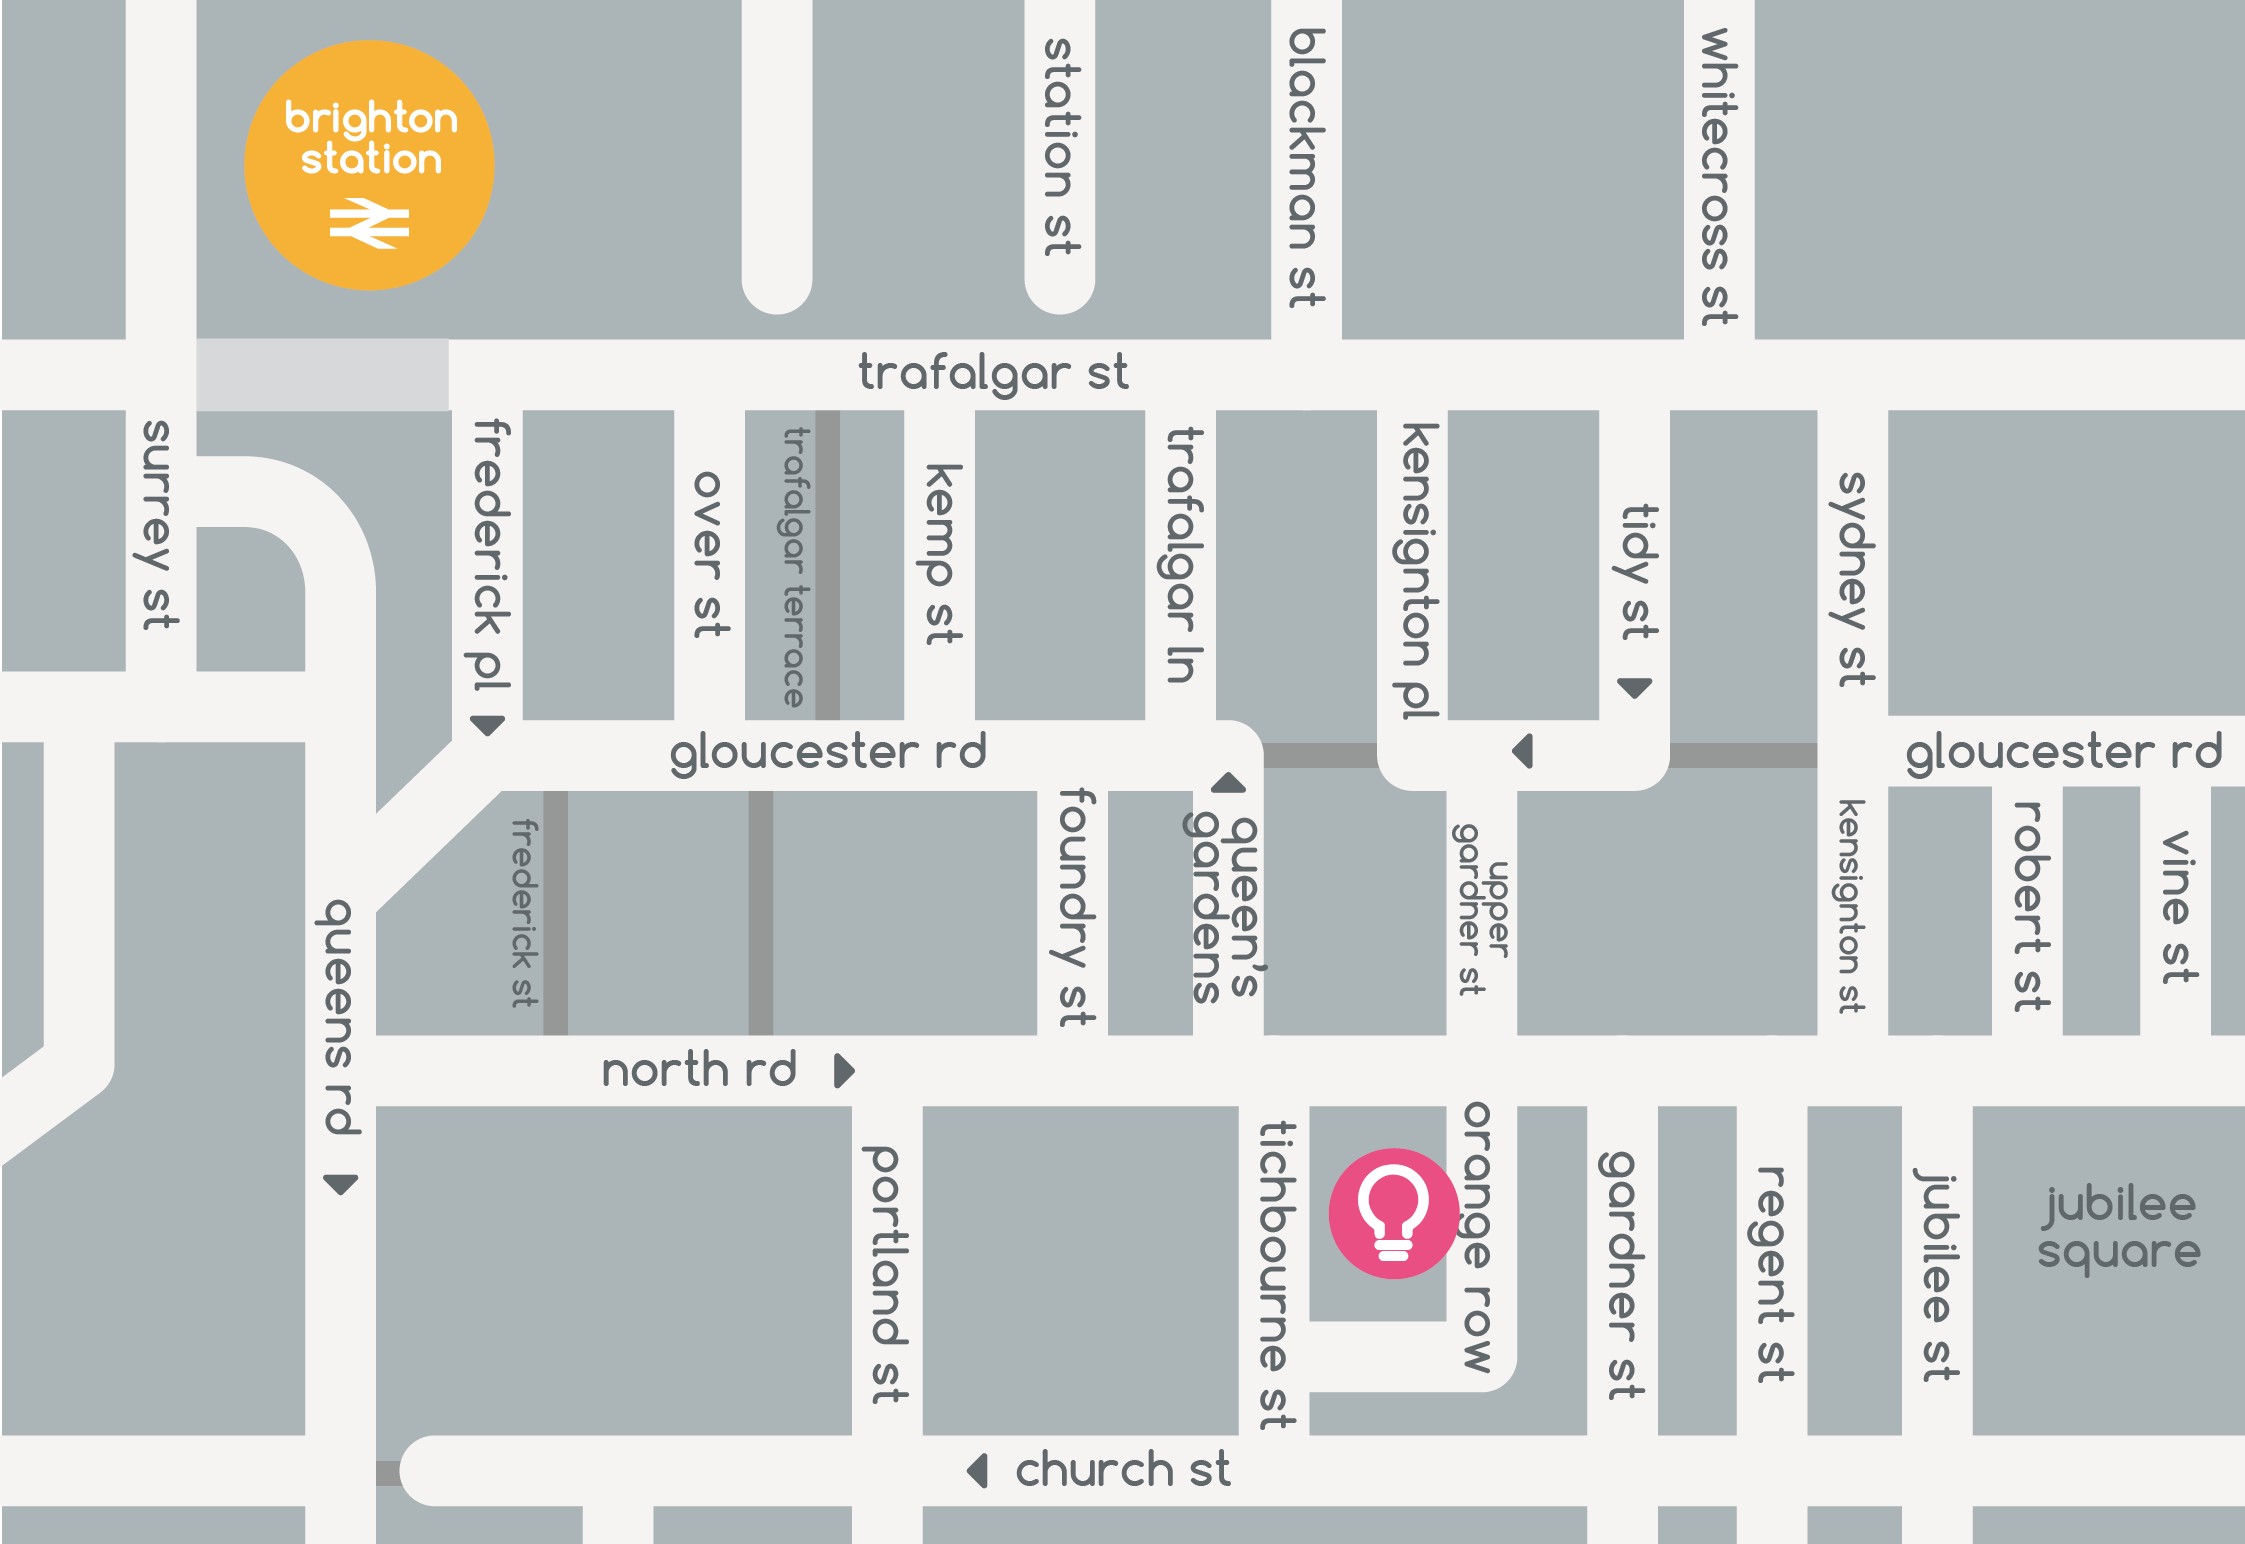 Map Showing Location of Switched On Comms, Brighton